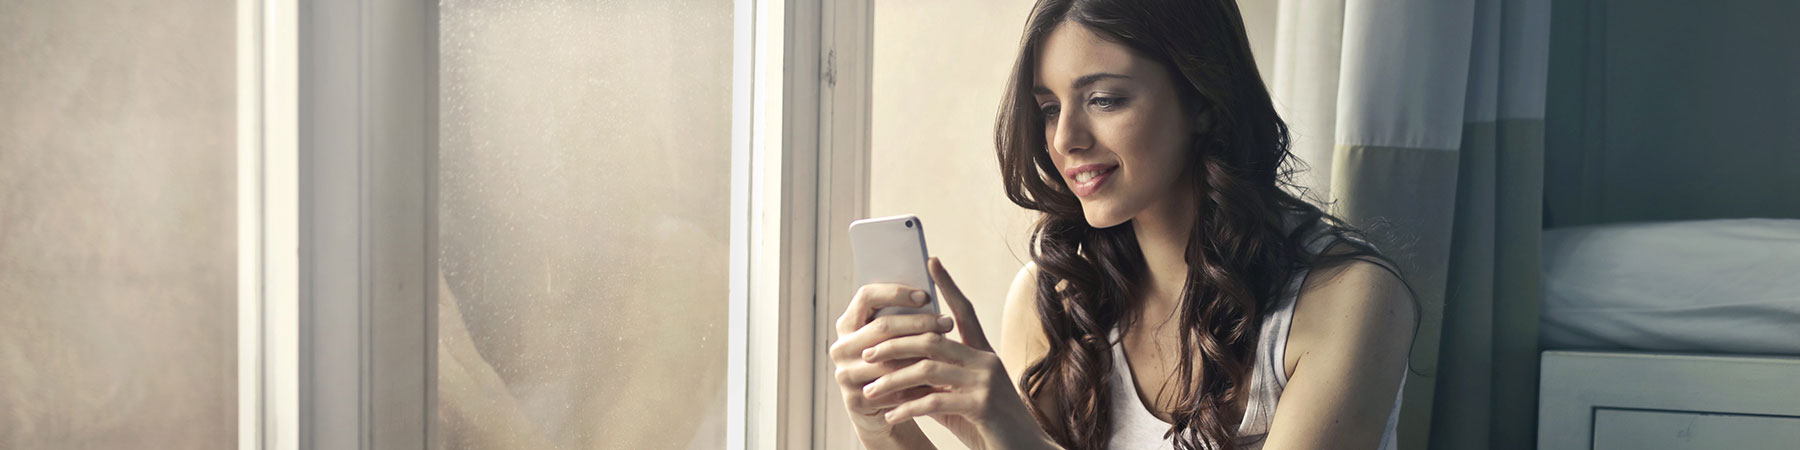 smiling woman looking at cell phone